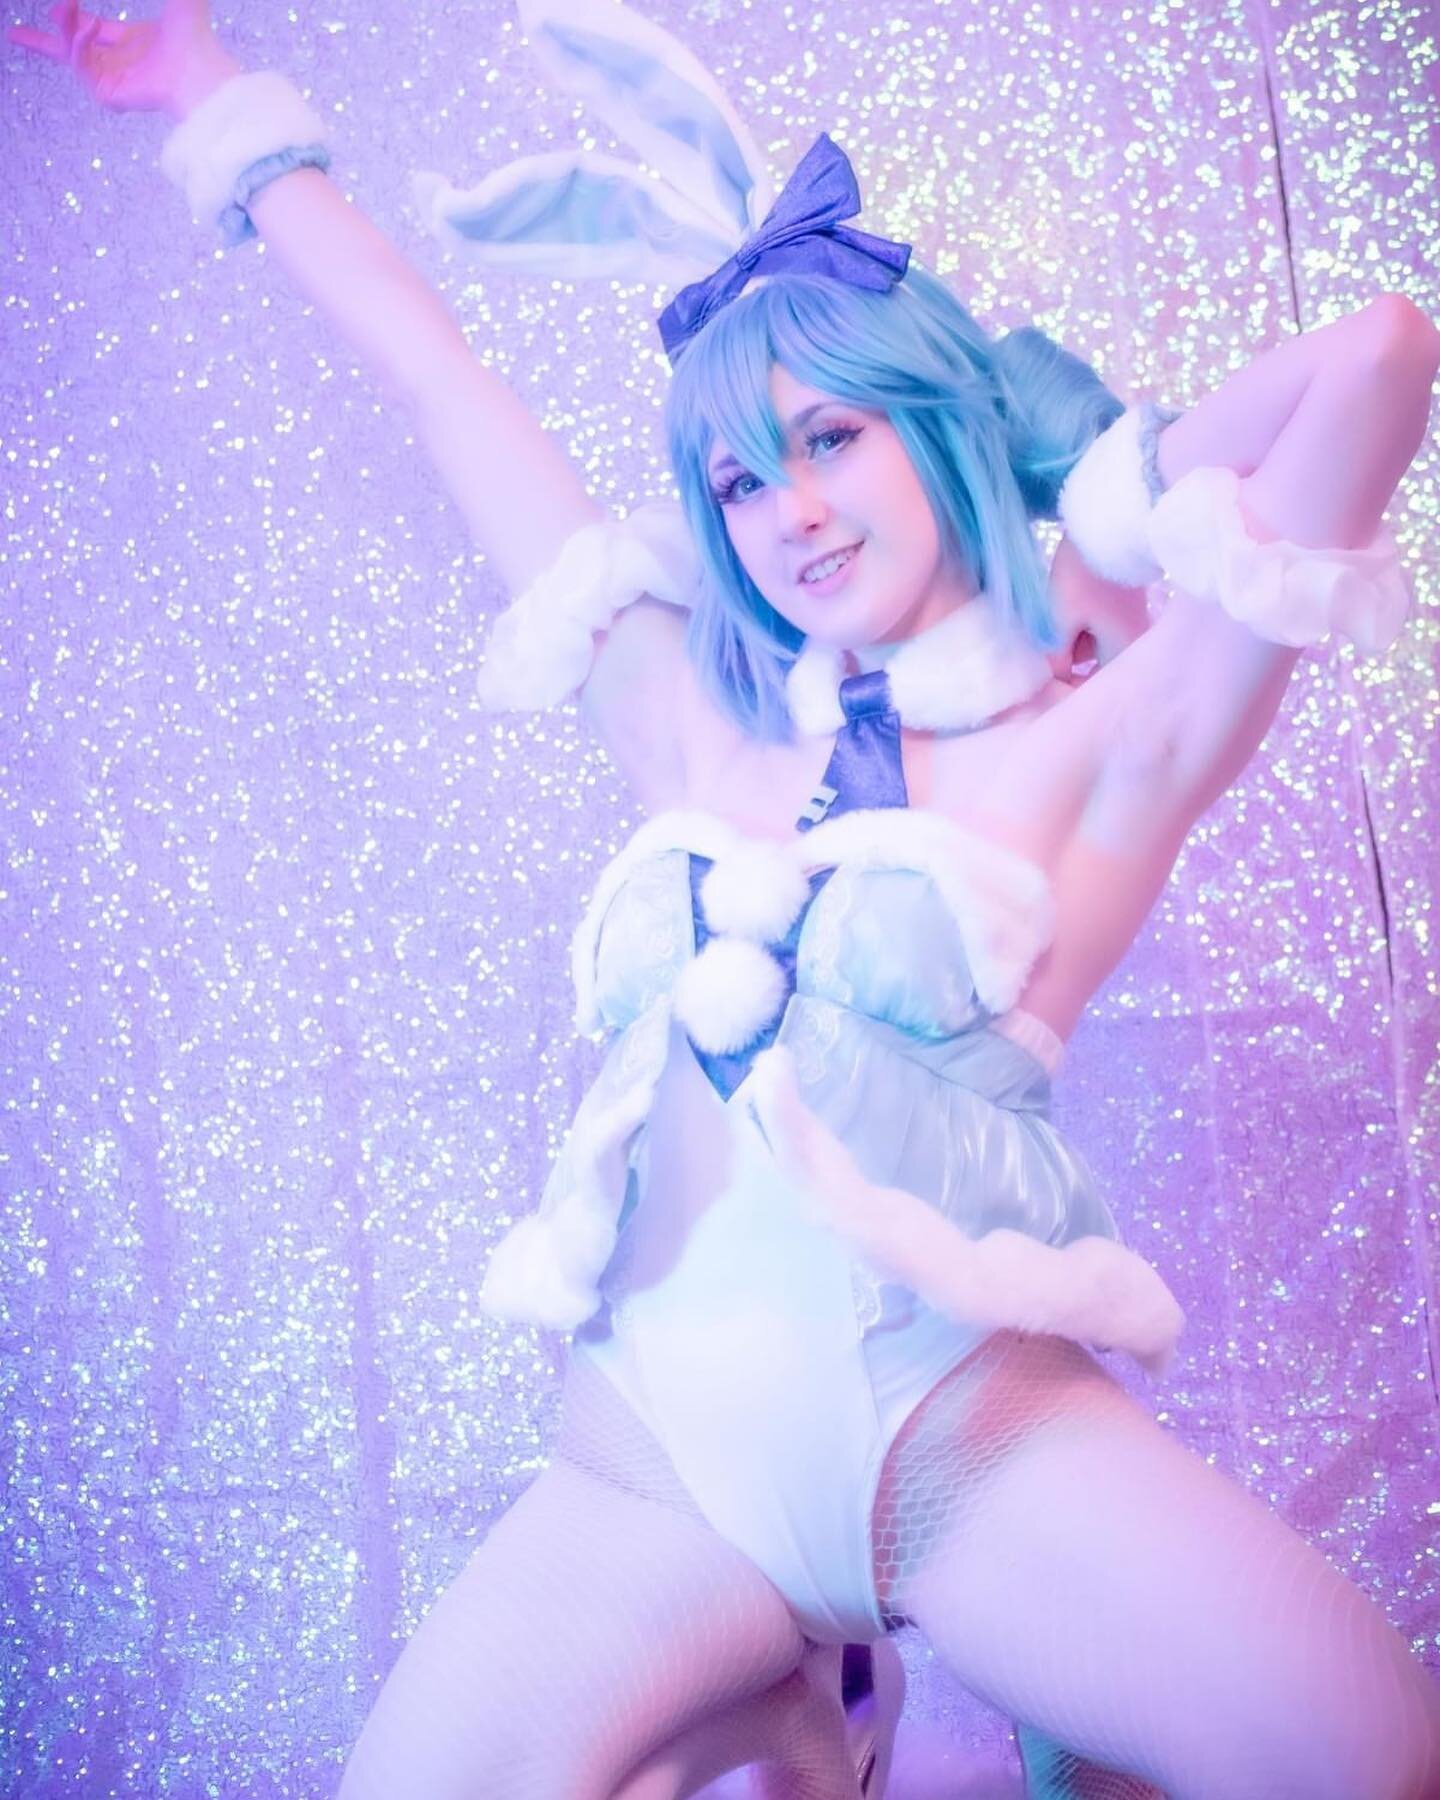 Happy Miku day!
Can&rsquo;t wait for the Miku Expo!  Trying to figure out what cosplay to wear to it.  Maybe I could make one of her racing outfits!

Anyways throwback to Snow Bunny Miku!

#hatsunemiku #hatsunemikucosplay #mikucosplay #mikuday